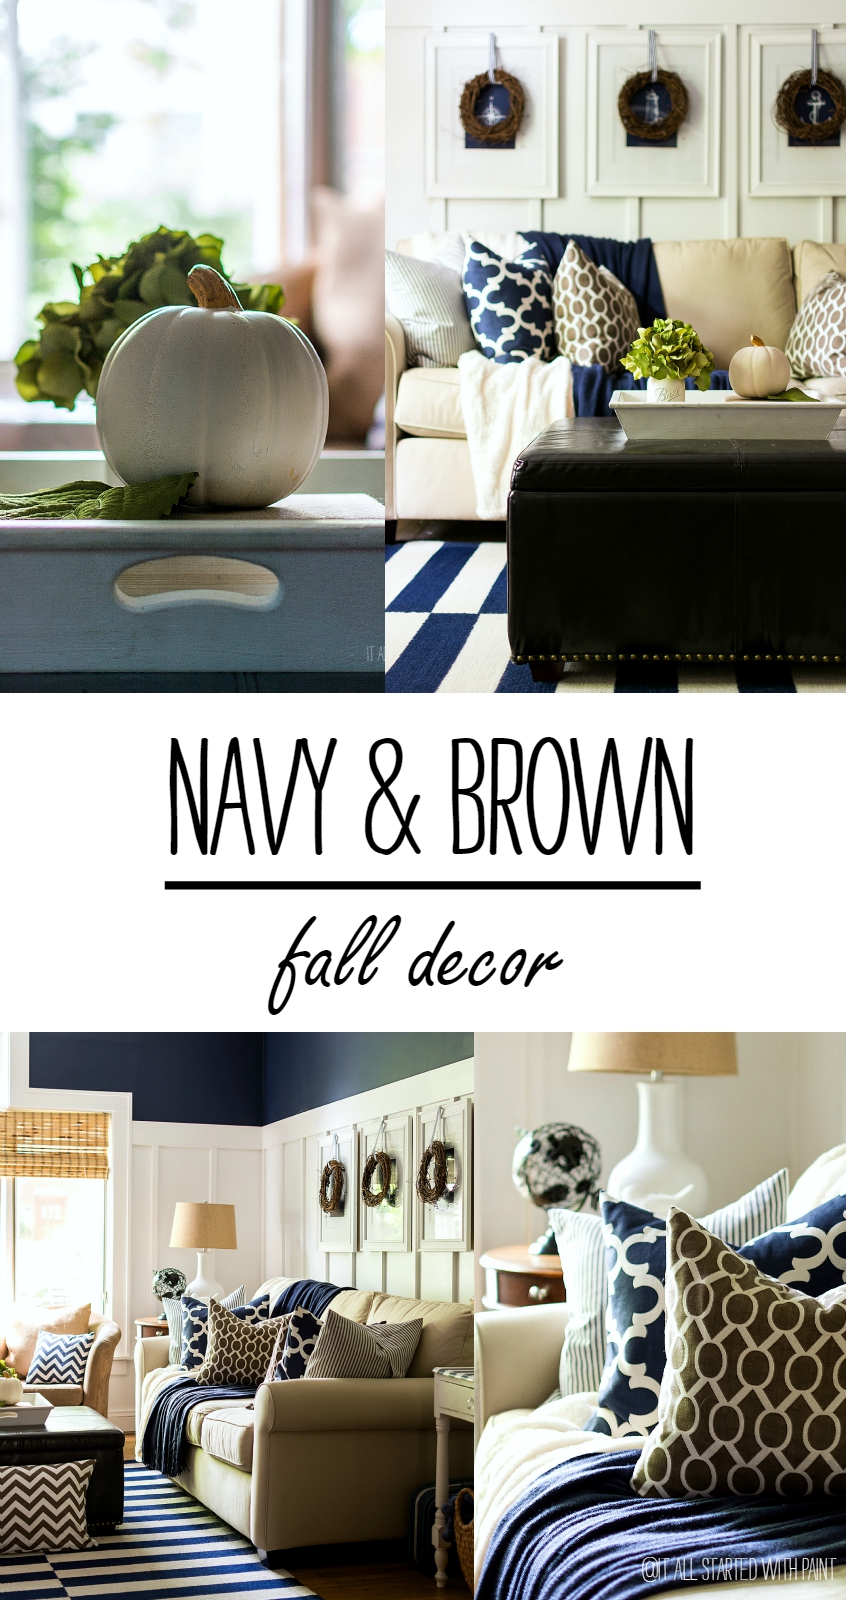 Simple Fall Decorating Ideas Using Navy & Brown & White